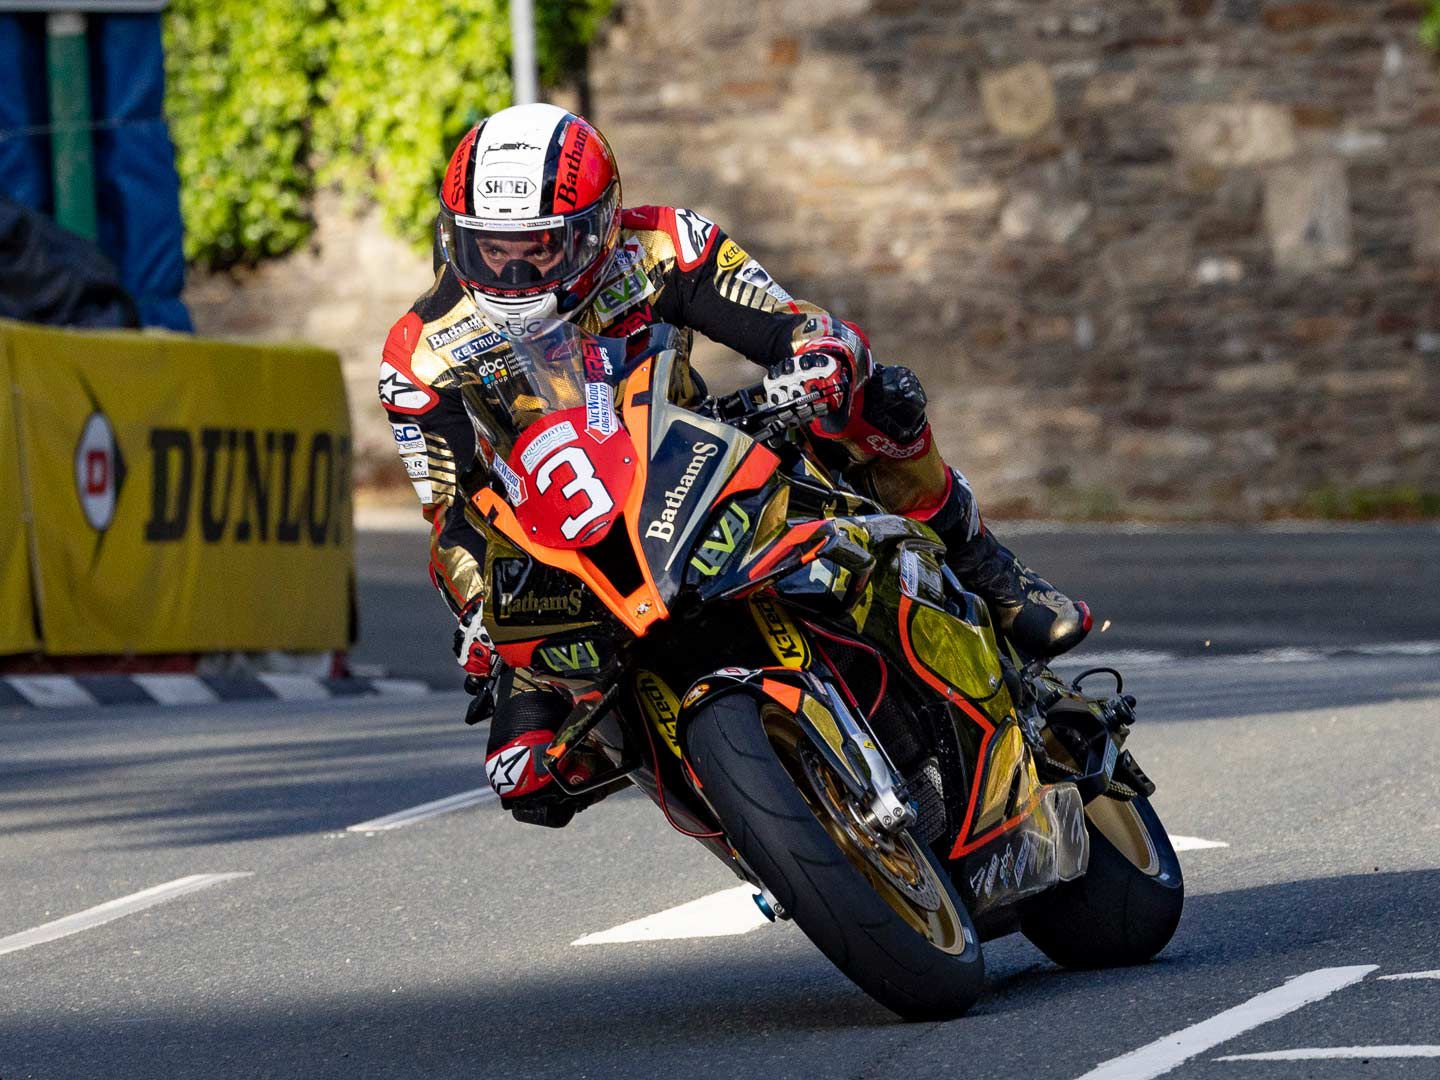 Nine-time TT winner Michael Rutter, seen here on his Bathams Racing BMW M 1000 RR, turned 50 this year and still has as much passion as when he first rode the TT in 1994.